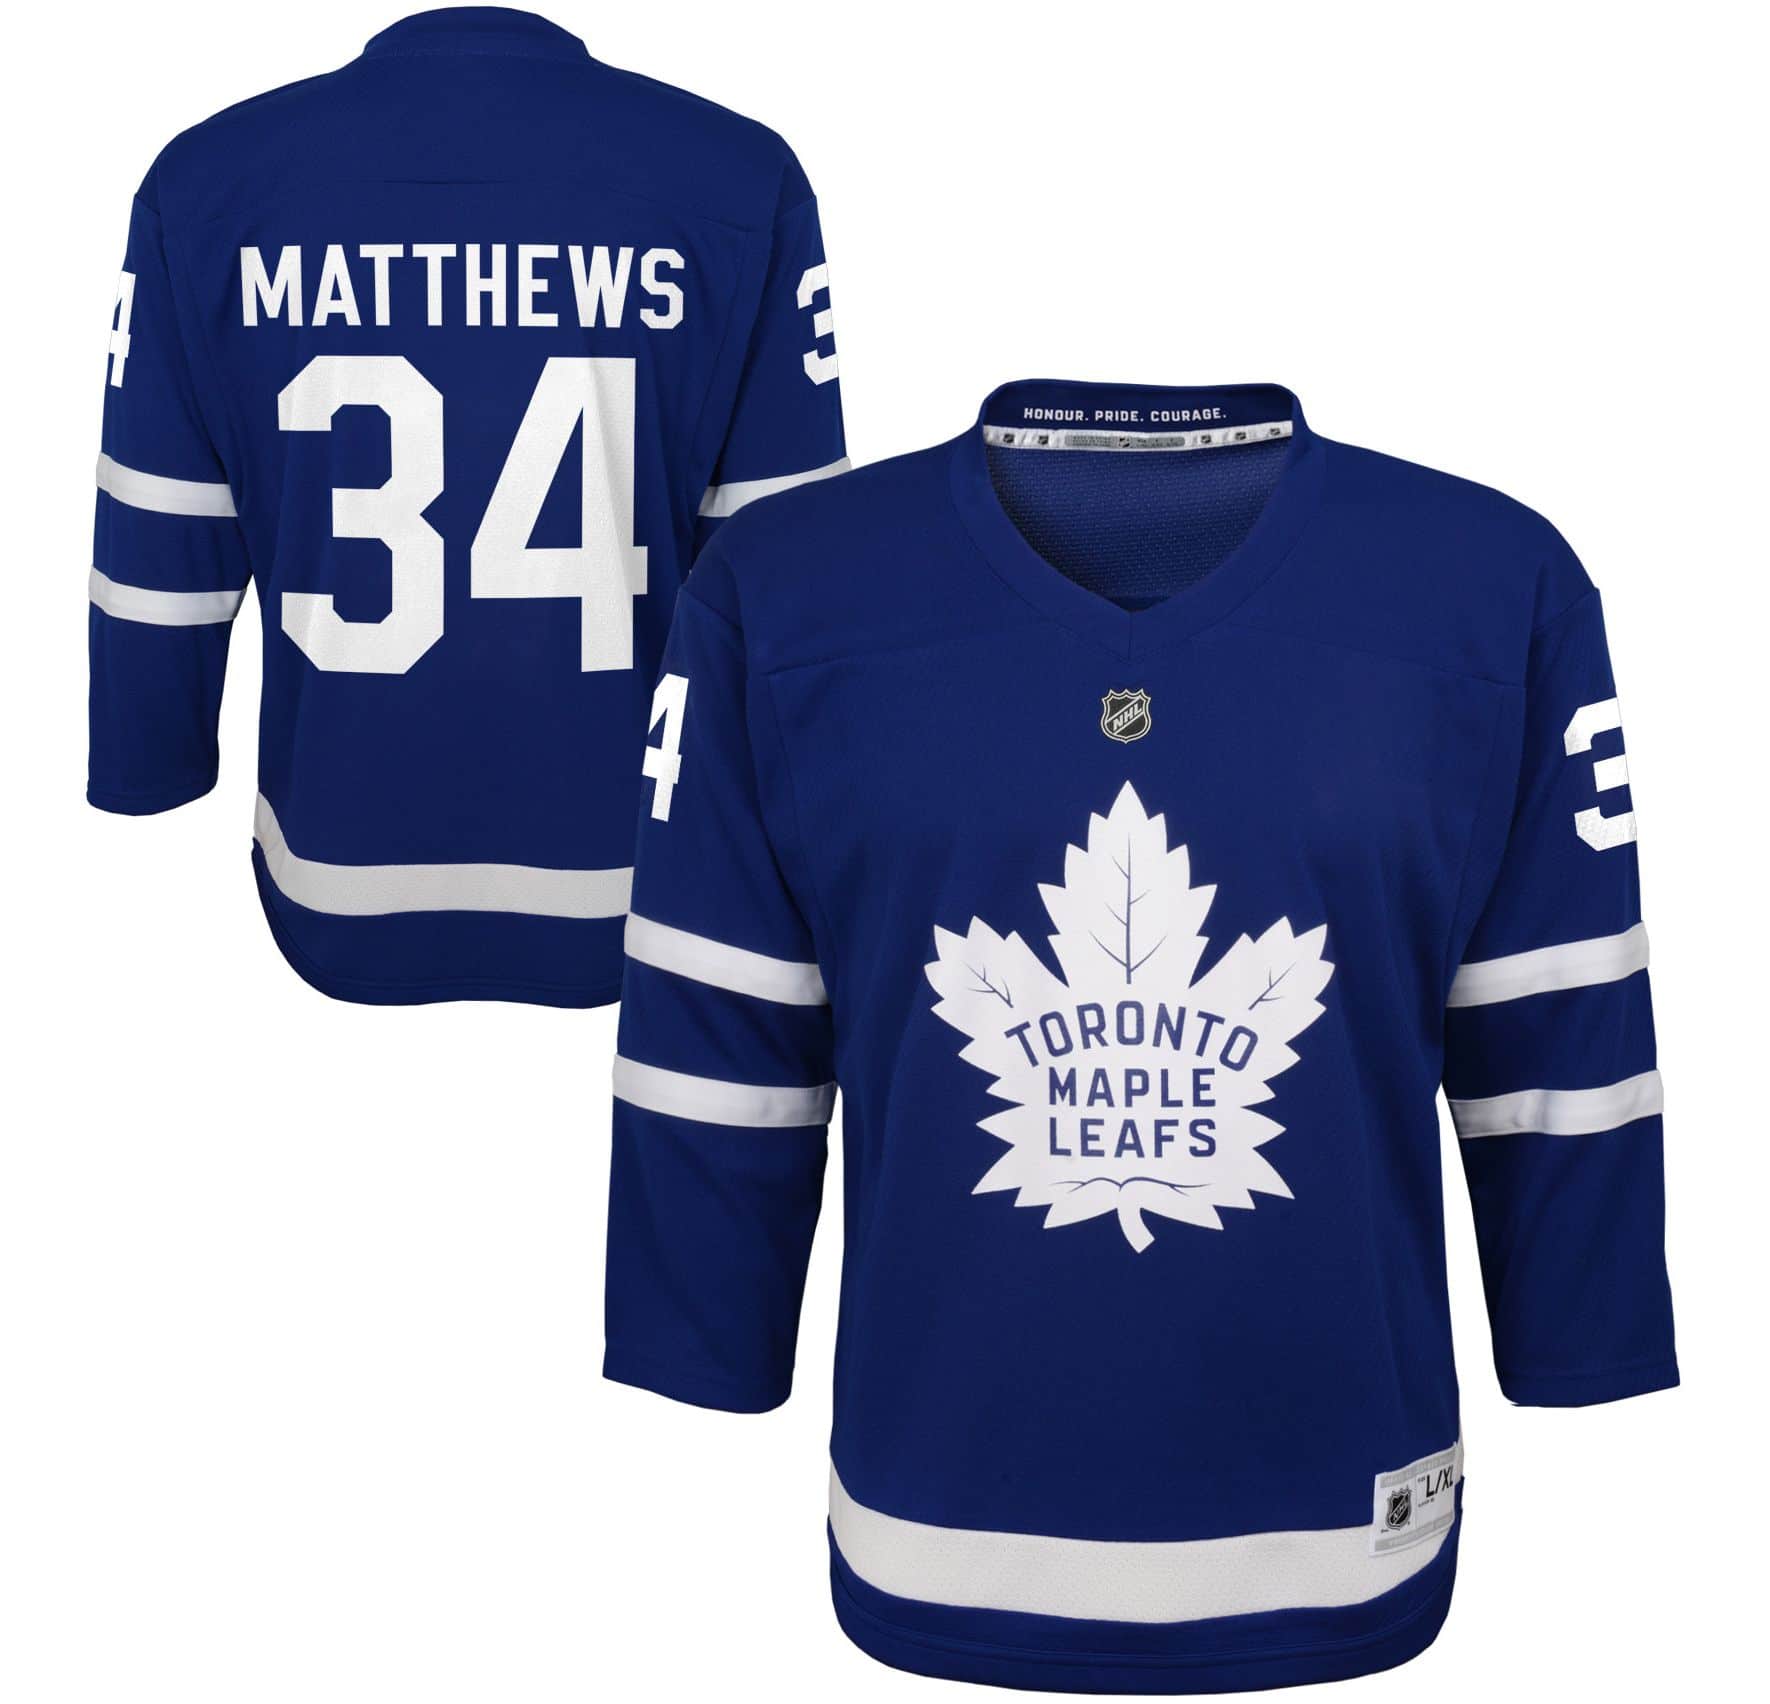 https://media-www.canadiantire.ca/product/playing/hockey/hockey-accessories/0838955/toronto-maple-leafs-matthews-jersey-youth-large-x-large-598e2694-50d7-4ad1-8401-50b8f5be33ac-jpgrendition.jpg